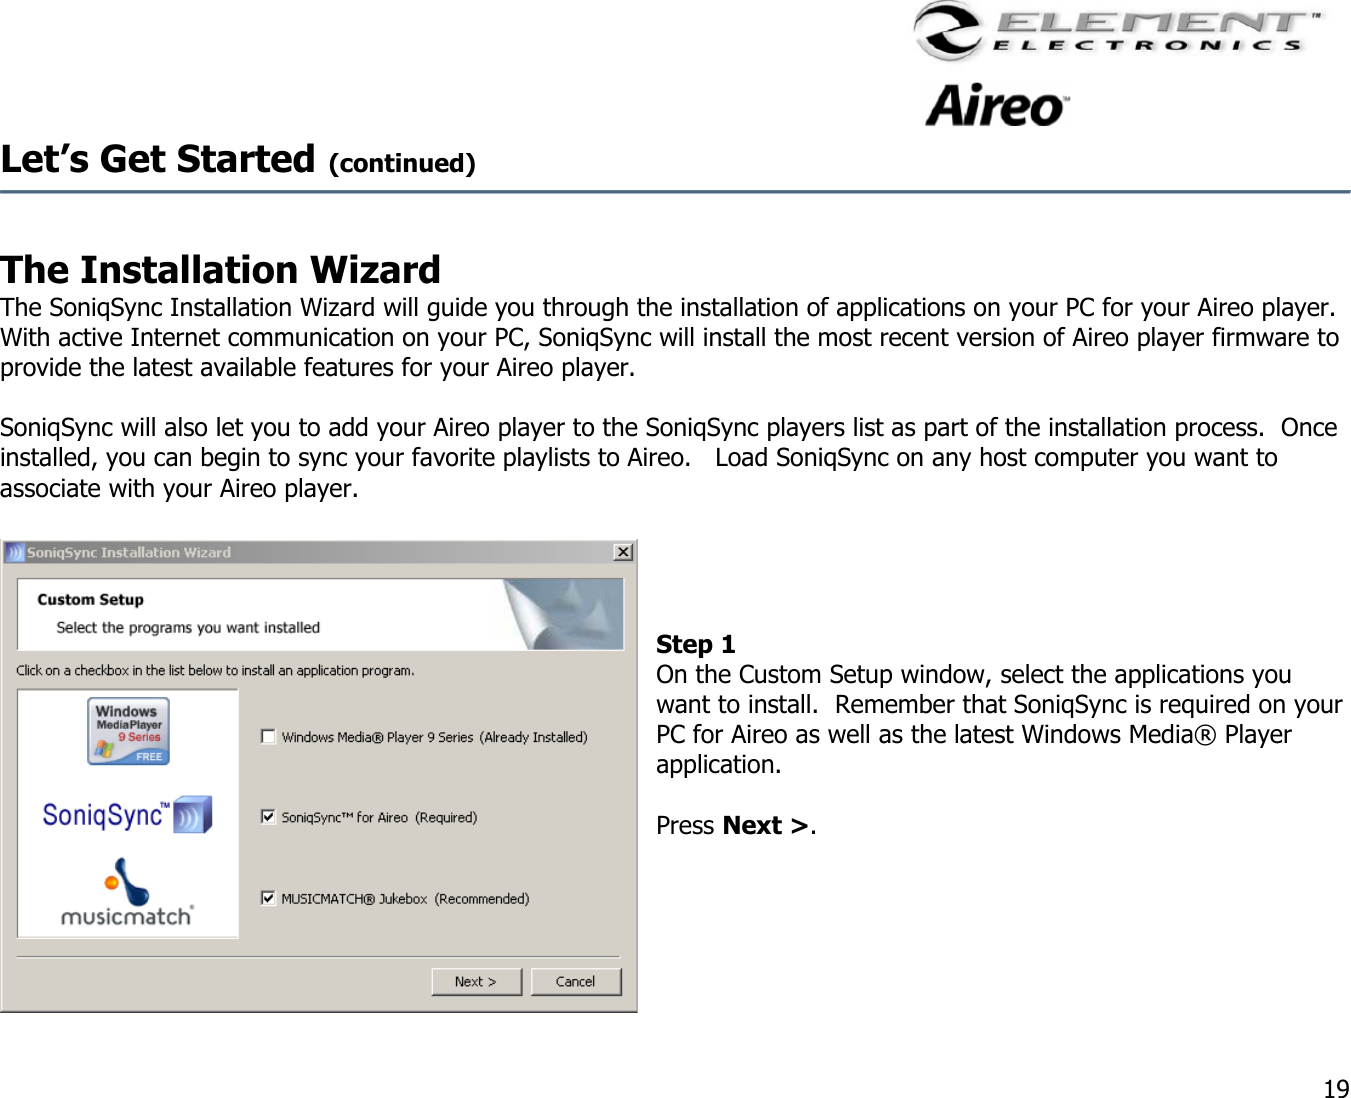                                                                                    19 Let’s Get Started (continued)   The Installation Wizard  The SoniqSync Installation Wizard will guide you through the installation of applications on your PC for your Aireo player.  With active Internet communication on your PC, SoniqSync will install the most recent version of Aireo player firmware to provide the latest available features for your Aireo player.    SoniqSync will also let you to add your Aireo player to the SoniqSync players list as part of the installation process.  Once installed, you can begin to sync your favorite playlists to Aireo.   Load SoniqSync on any host computer you want to associate with your Aireo player.        Step 1  On the Custom Setup window, select the applications you want to install.  Remember that SoniqSync is required on your PC for Aireo as well as the latest Windows Media® Player application.  Press Next &gt;.     